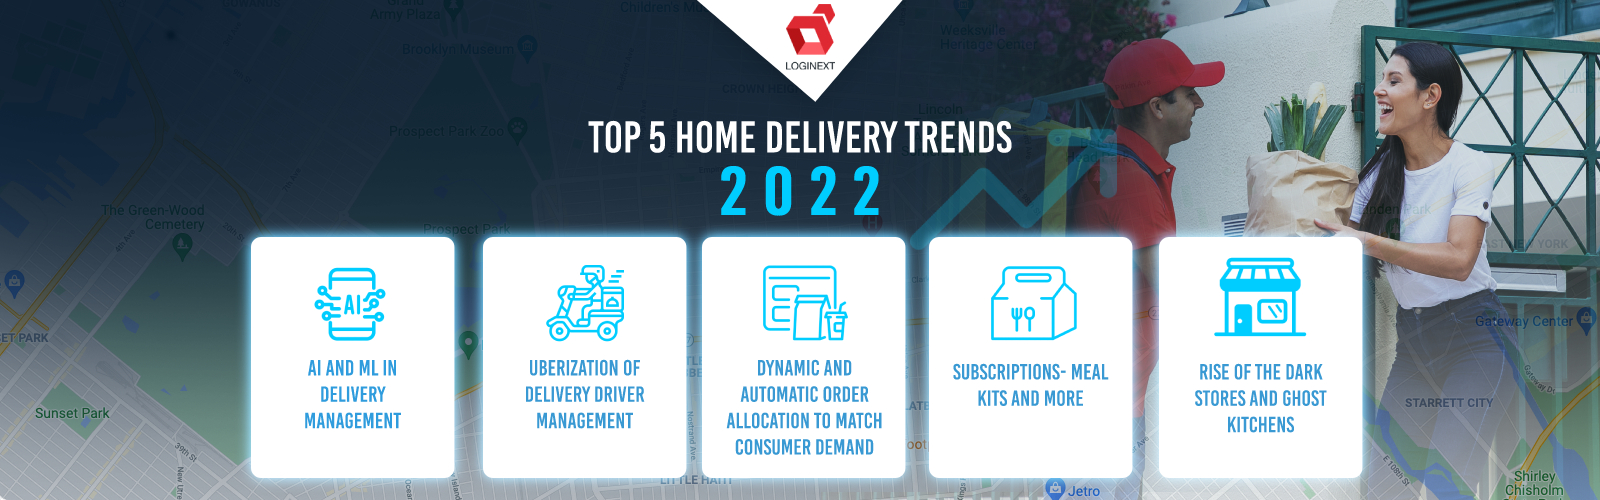 Top 5 Trends for the Home Delivery Industry for 2022